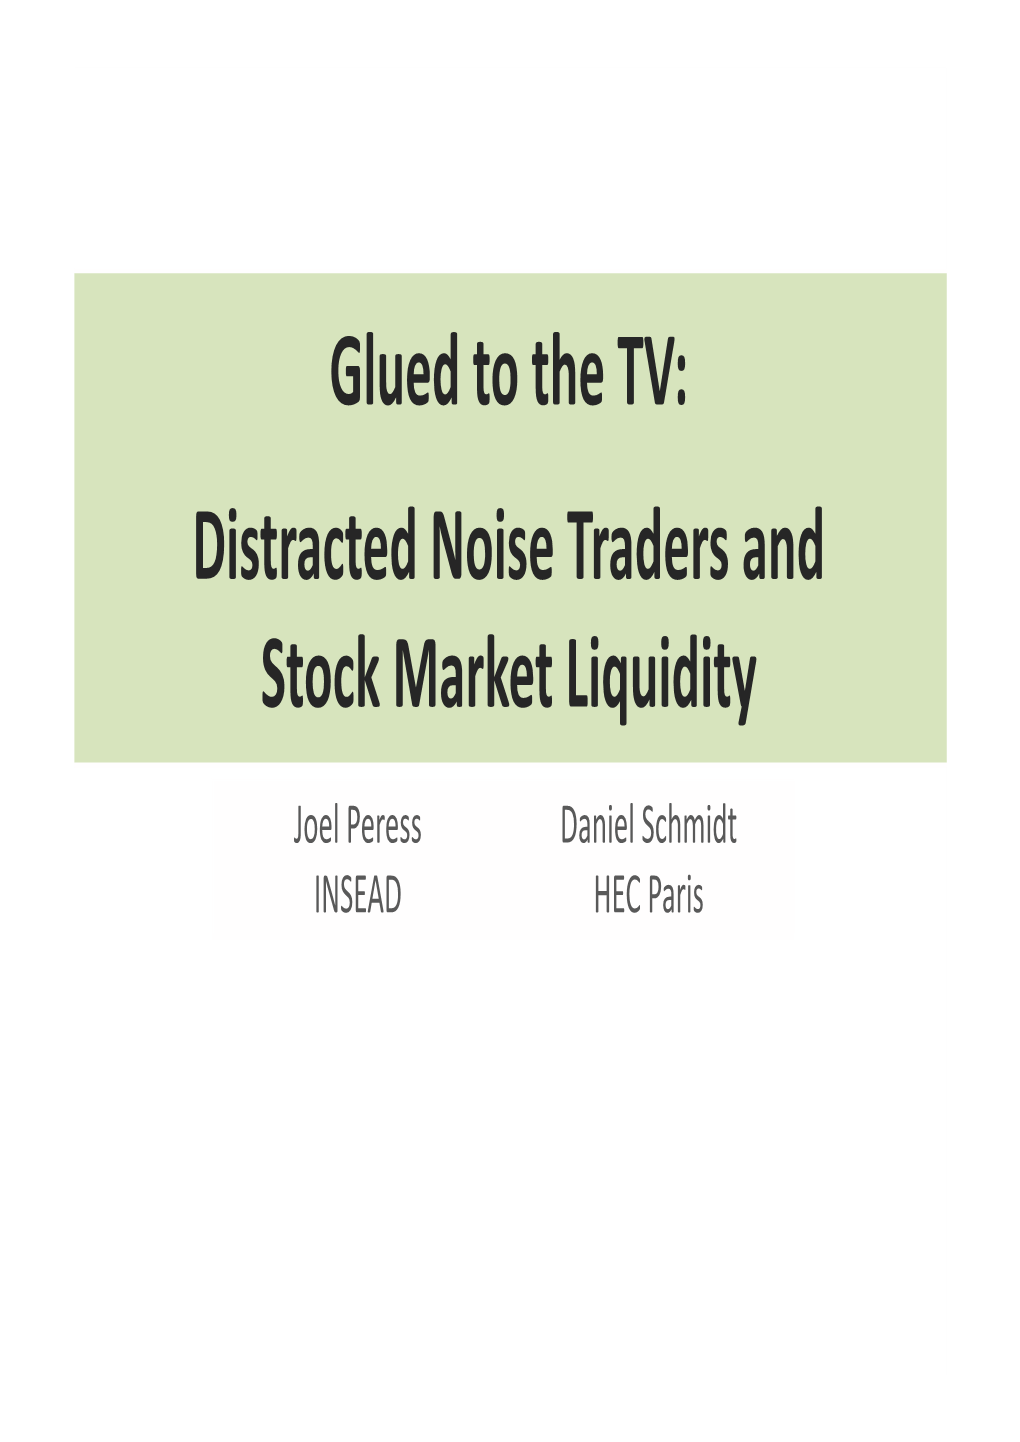 Glued to the TV: Distracted Noise Traders and Stock Market Liquidity